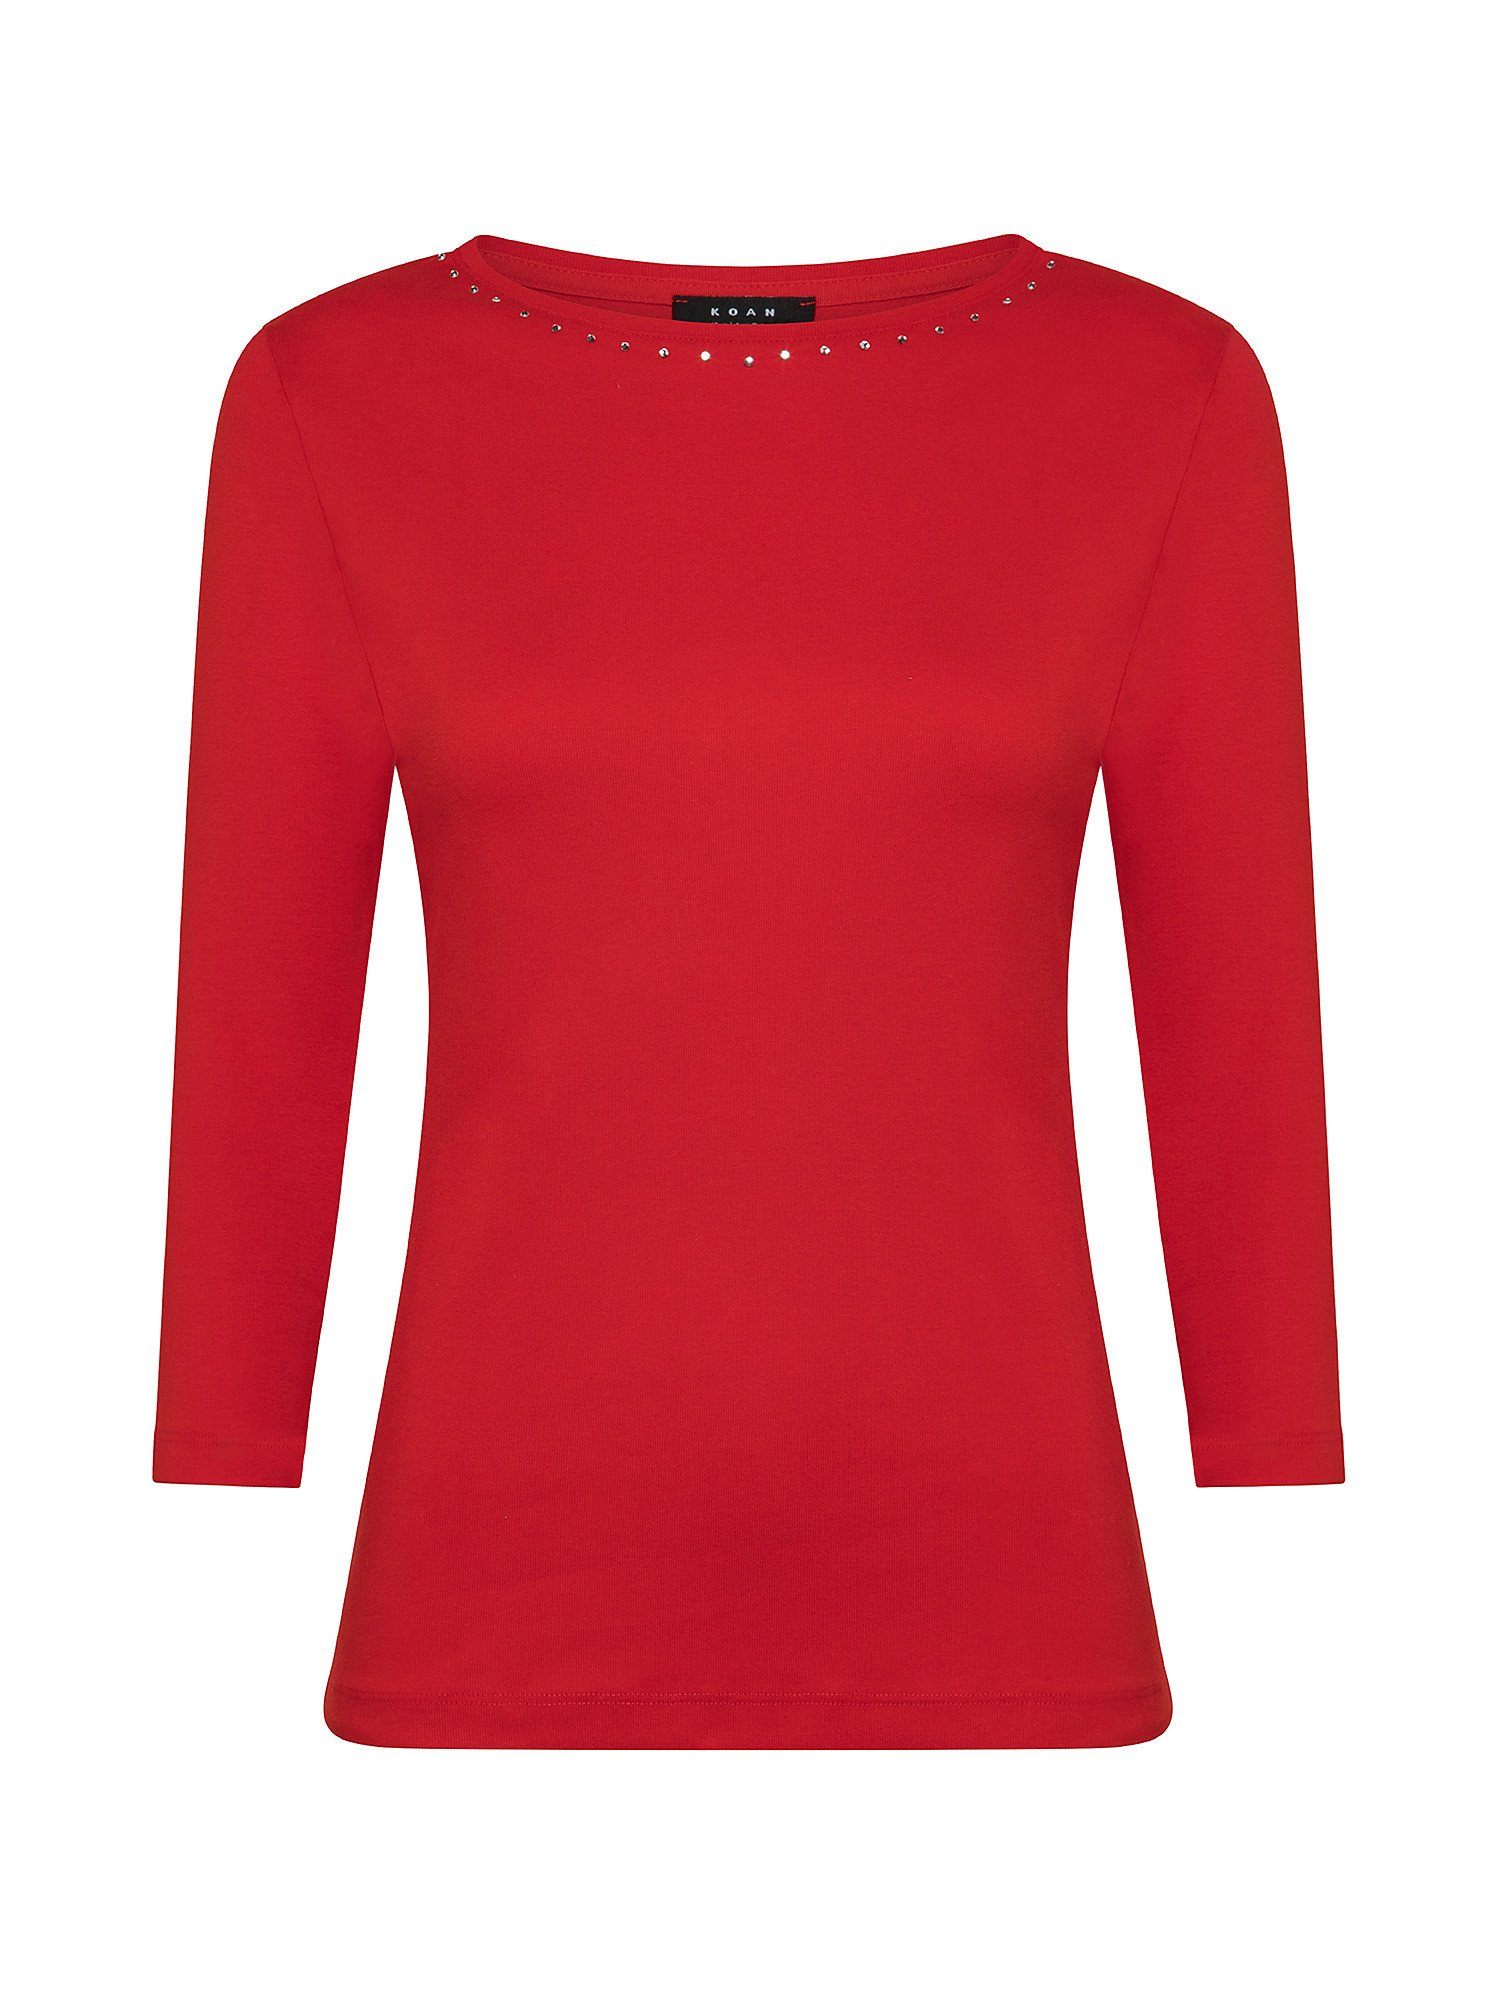 Crewneck T-shirt with rhinestones, Red, large image number 0